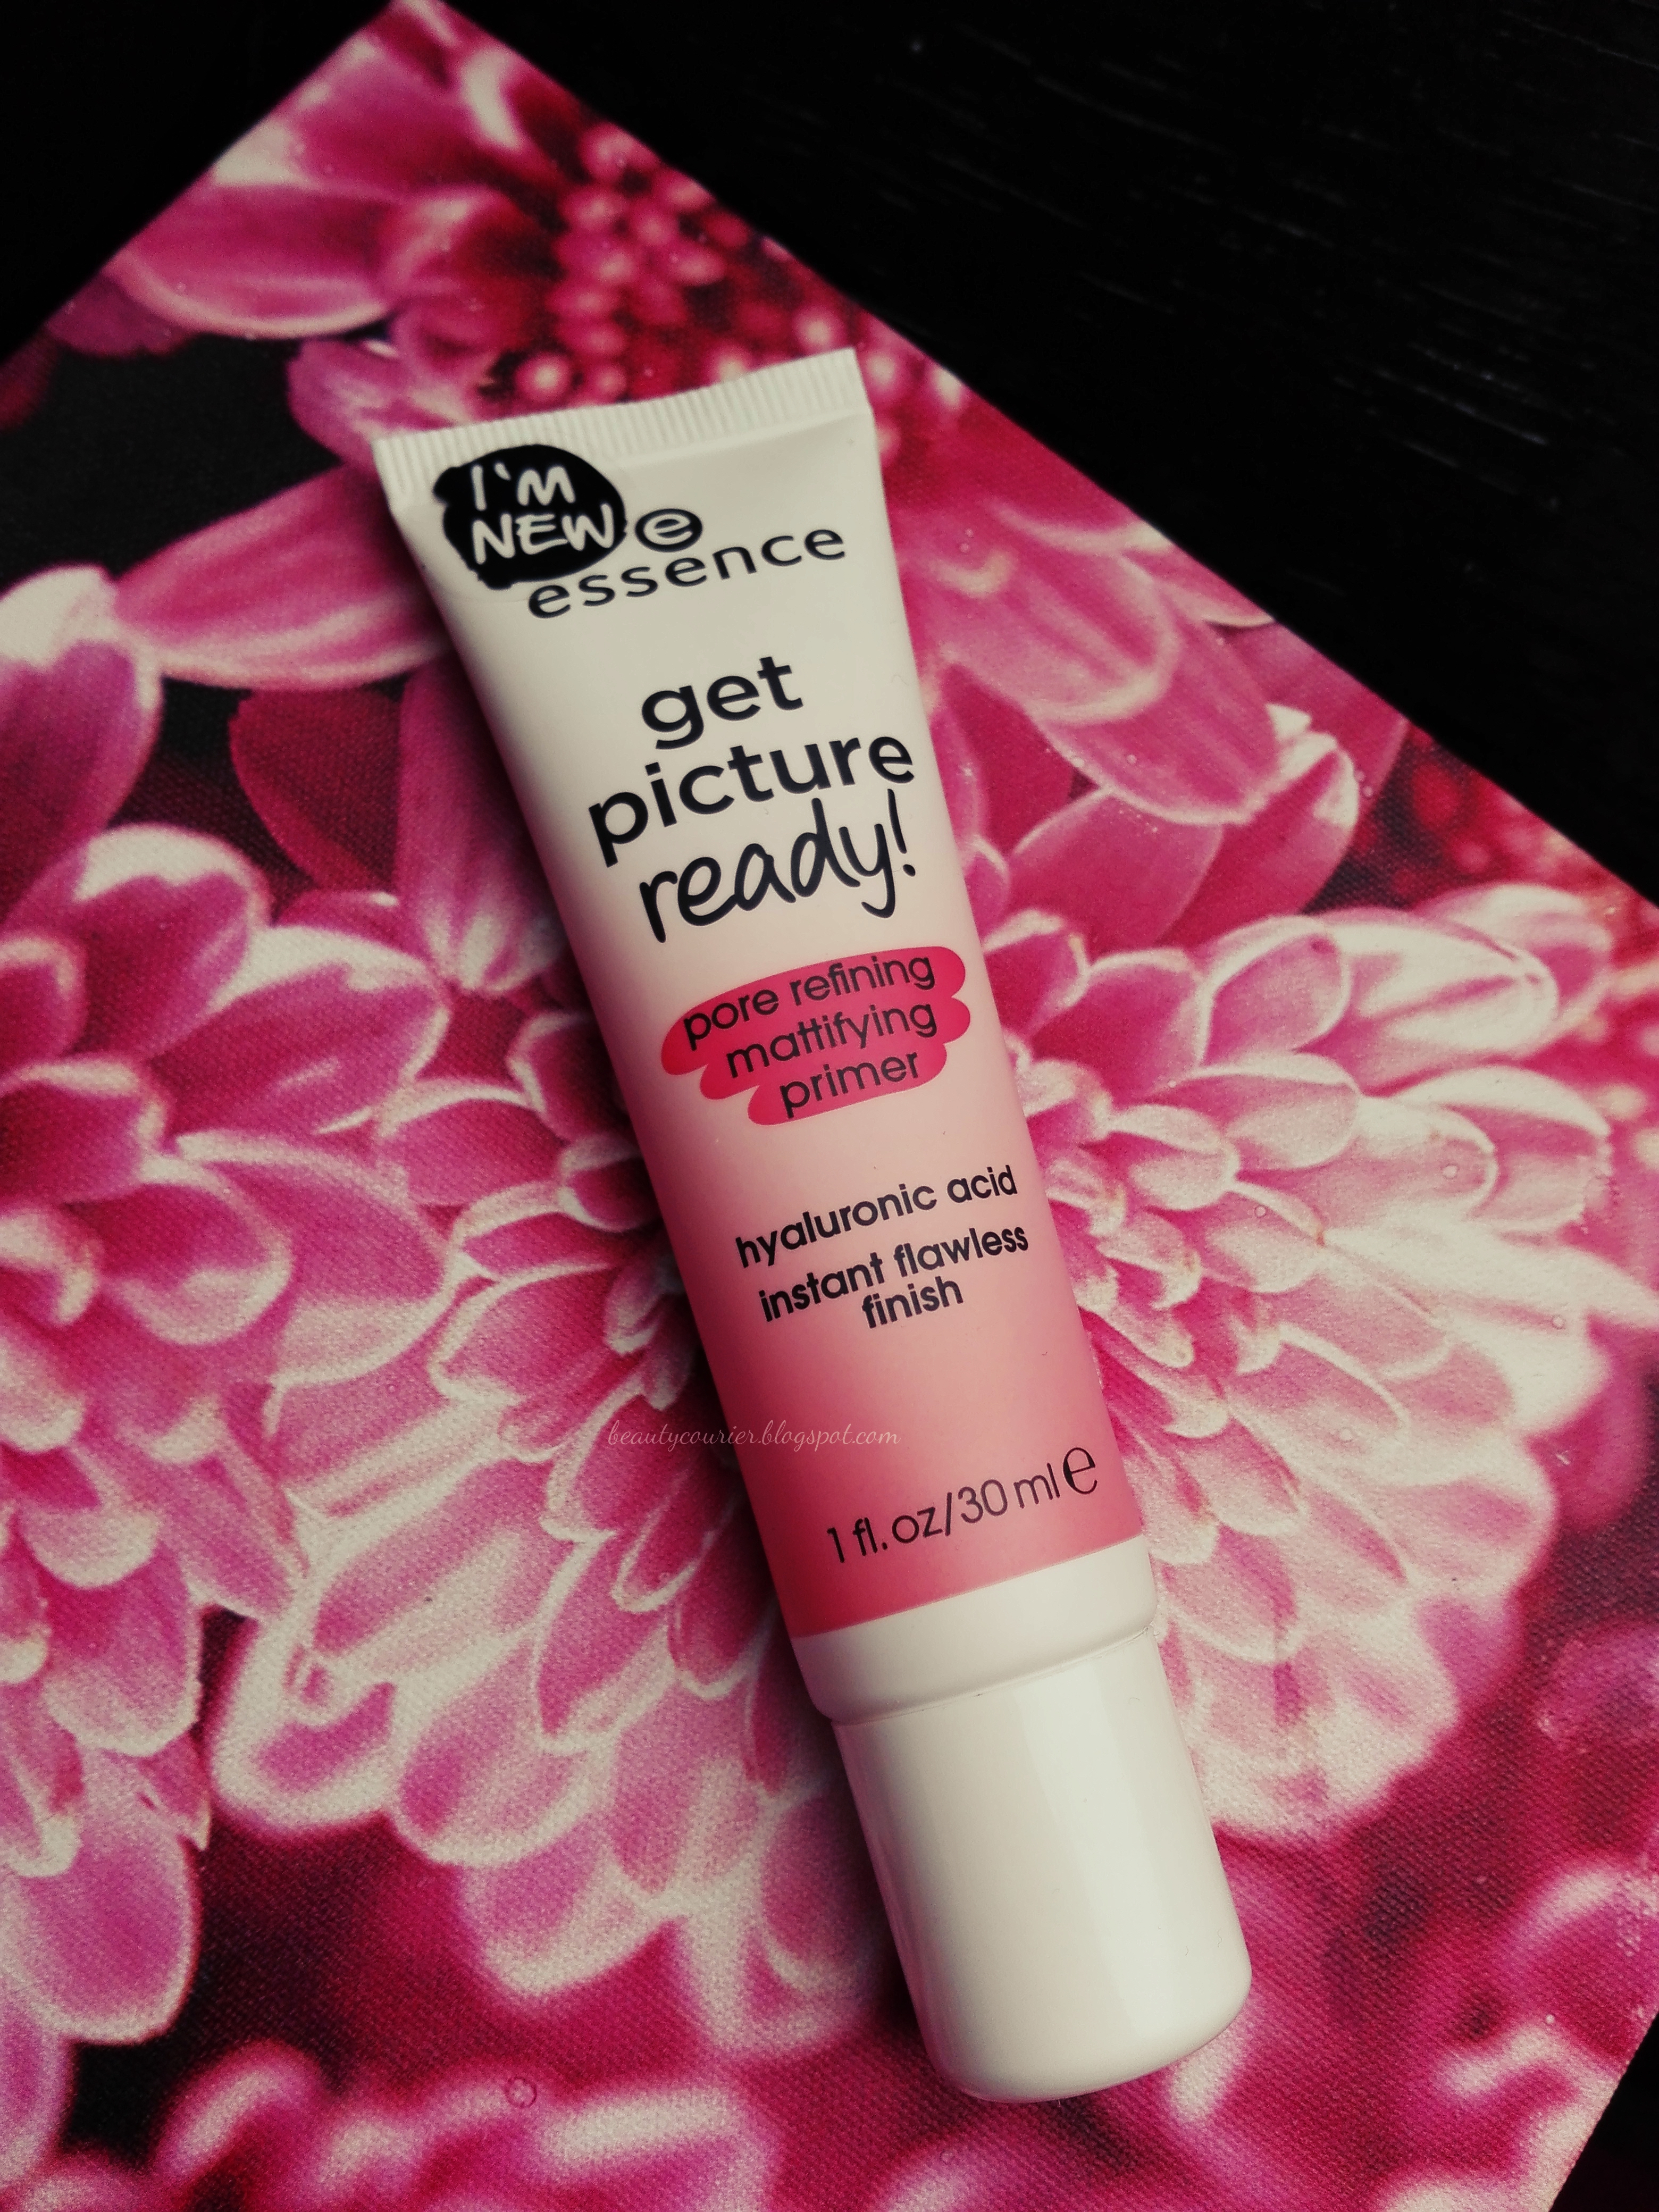 Beauty Courier: Essence - Get picture ready! Pore refining mattifying primer